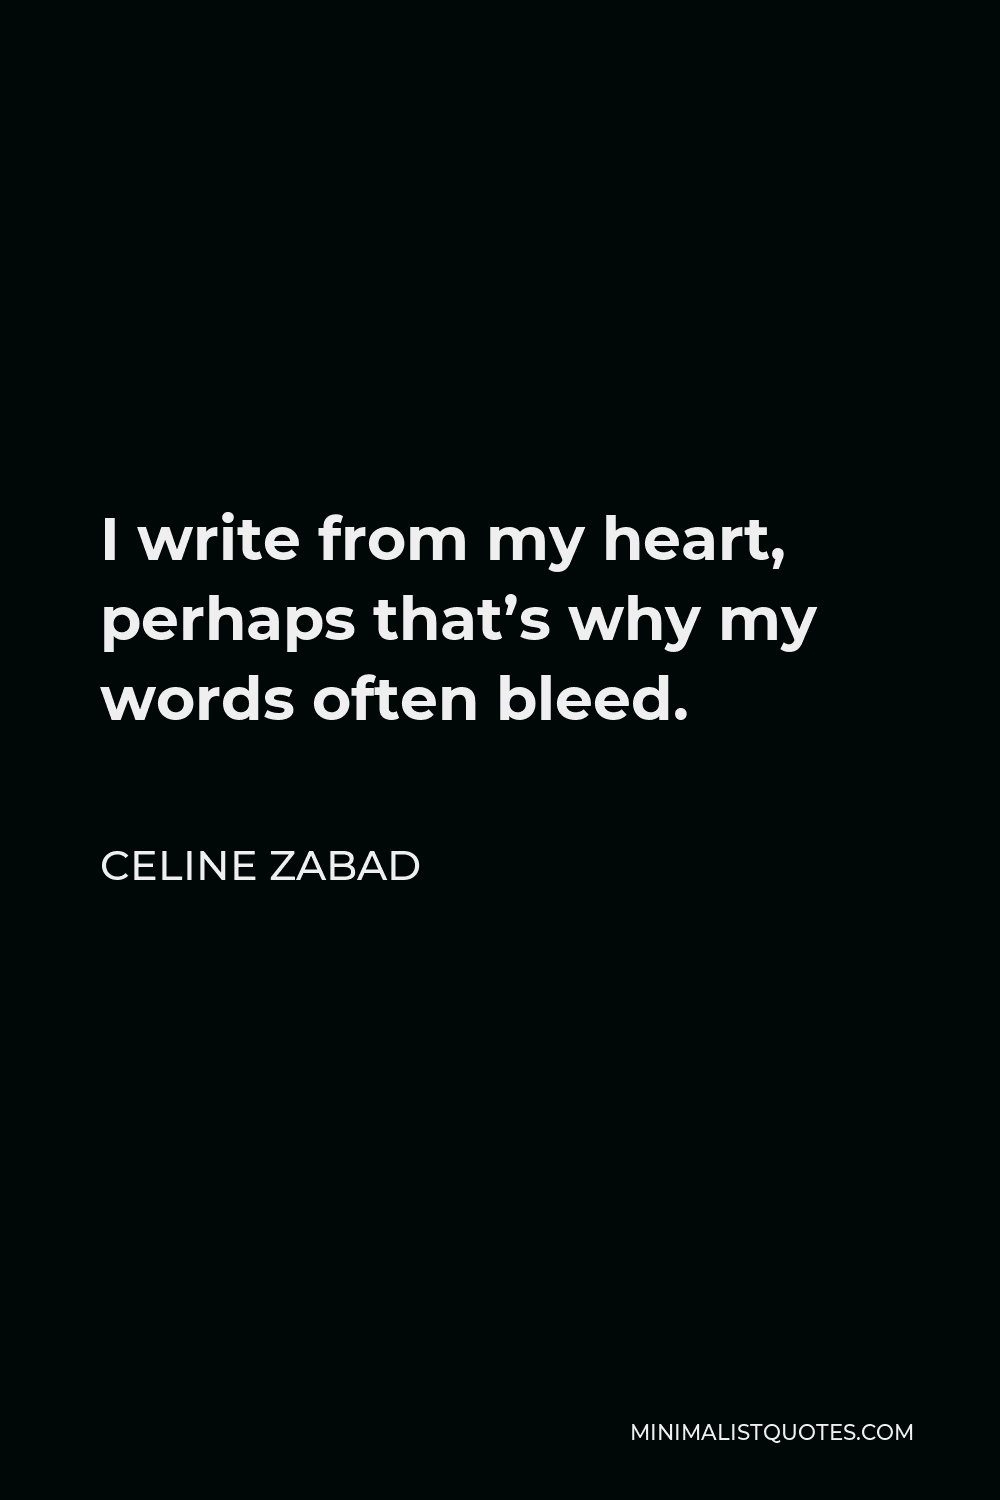 Celine Zabad Quote - I write from my heart, perhaps that’s why my words often bleed.